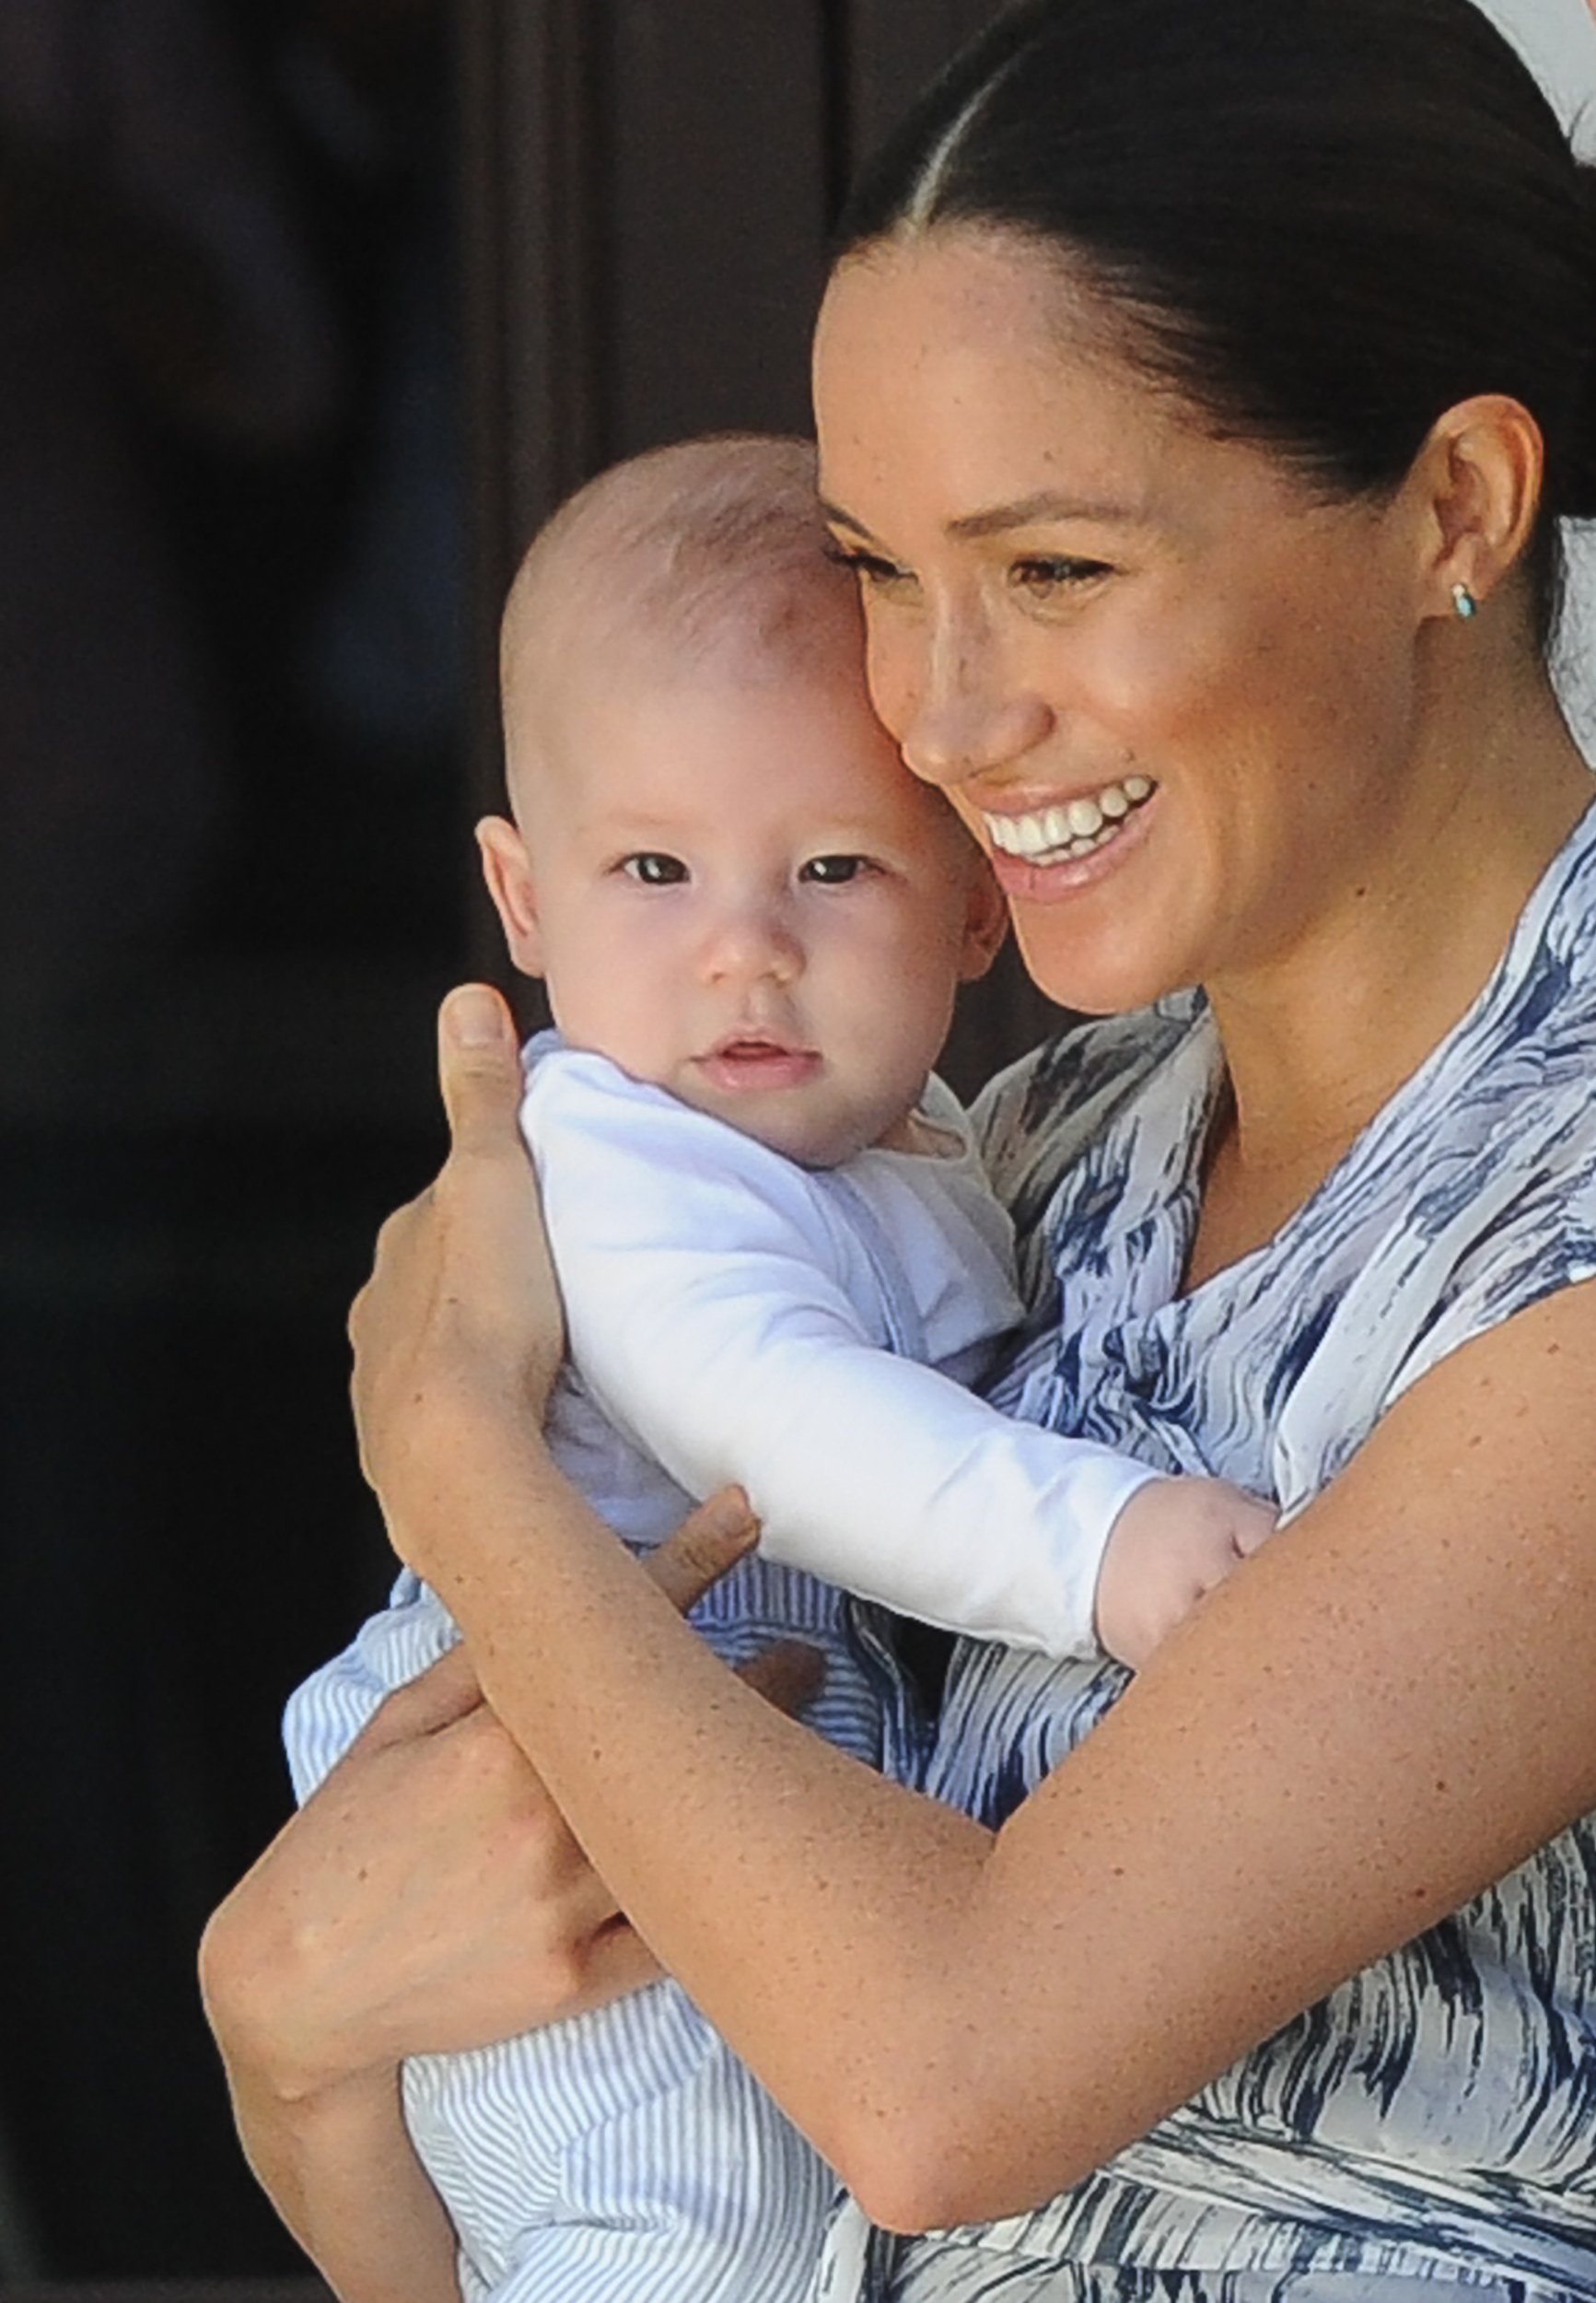 Britain's Duchess of Sussex Meghan, hold her baby son Archie as she and the husband meet with Archbishop Desmond Tutu and his wife Leah at the Tutu Legacy Foundation in Cape Town on September 25, 2019. - The British royal couple are on a 10-day tour of southern Africa -- their first official visit as a family since their son Archie was born in May. (Photo credit HENK KRUGER/AFP/Getty Images)